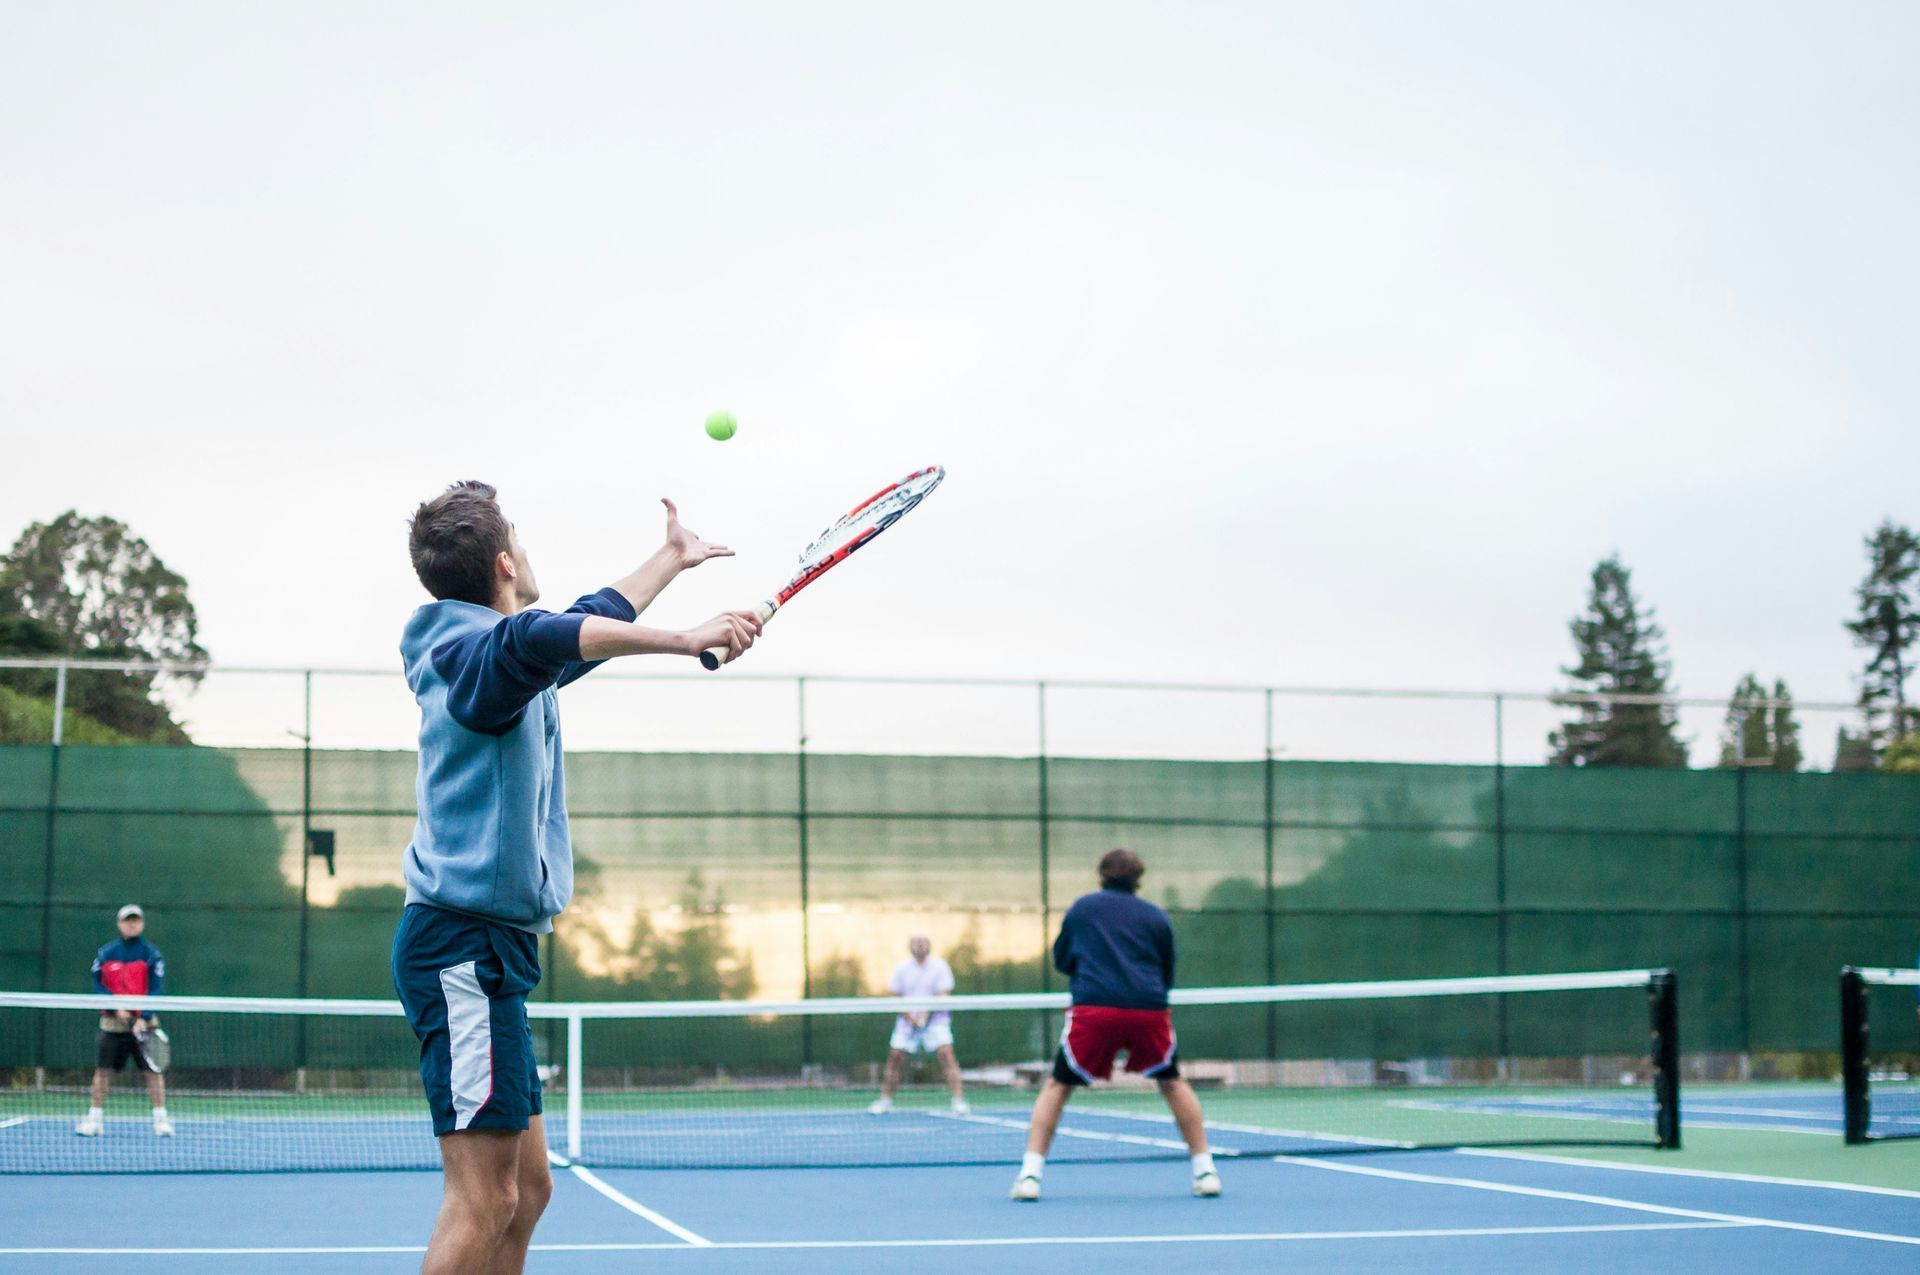 A man is hitting a tennis ball with a racket on a tennis court.